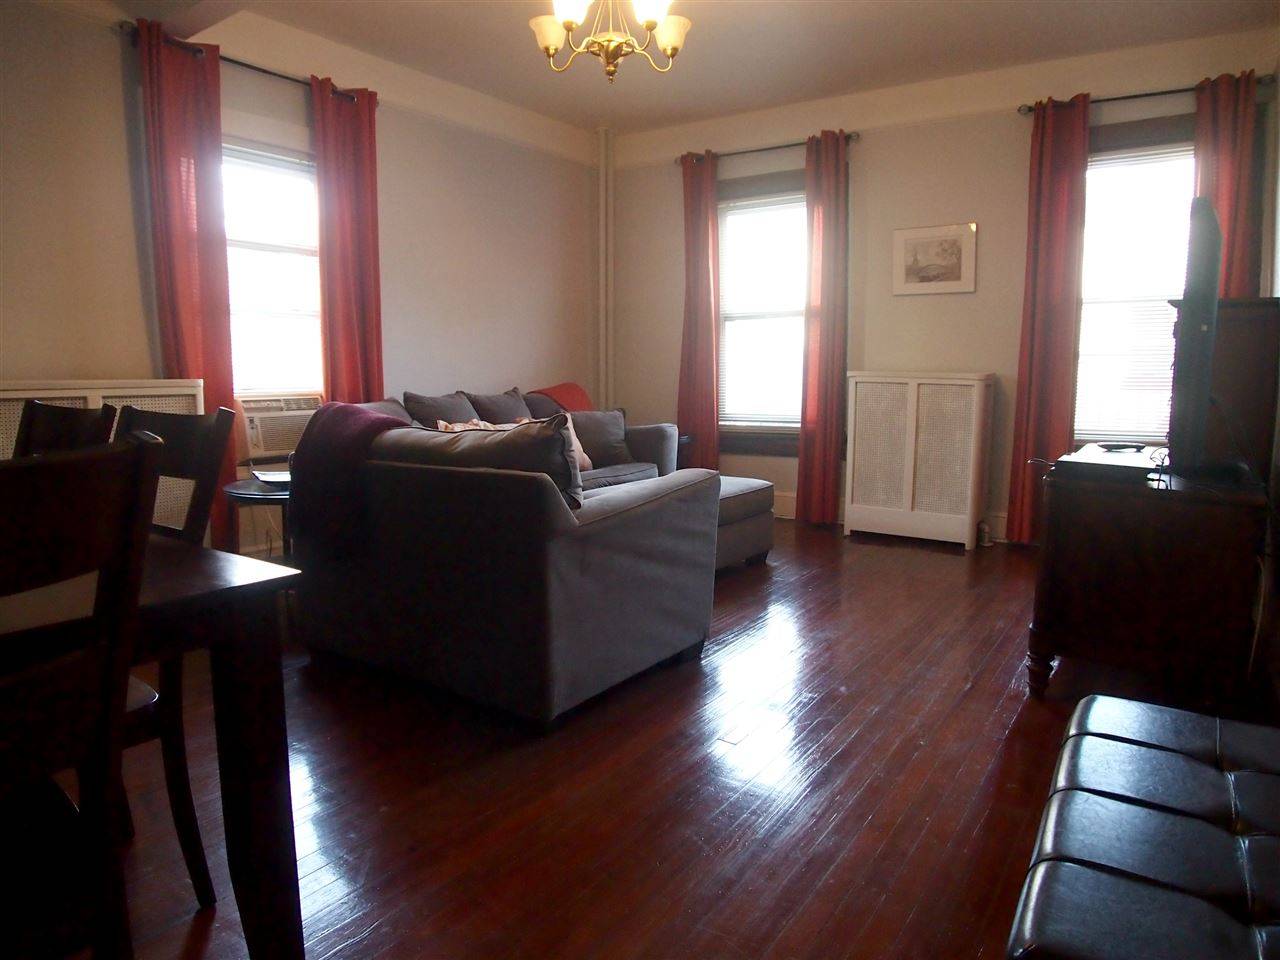 This fantastic oversized 1 bedroom is located just 1 block to Washington Street